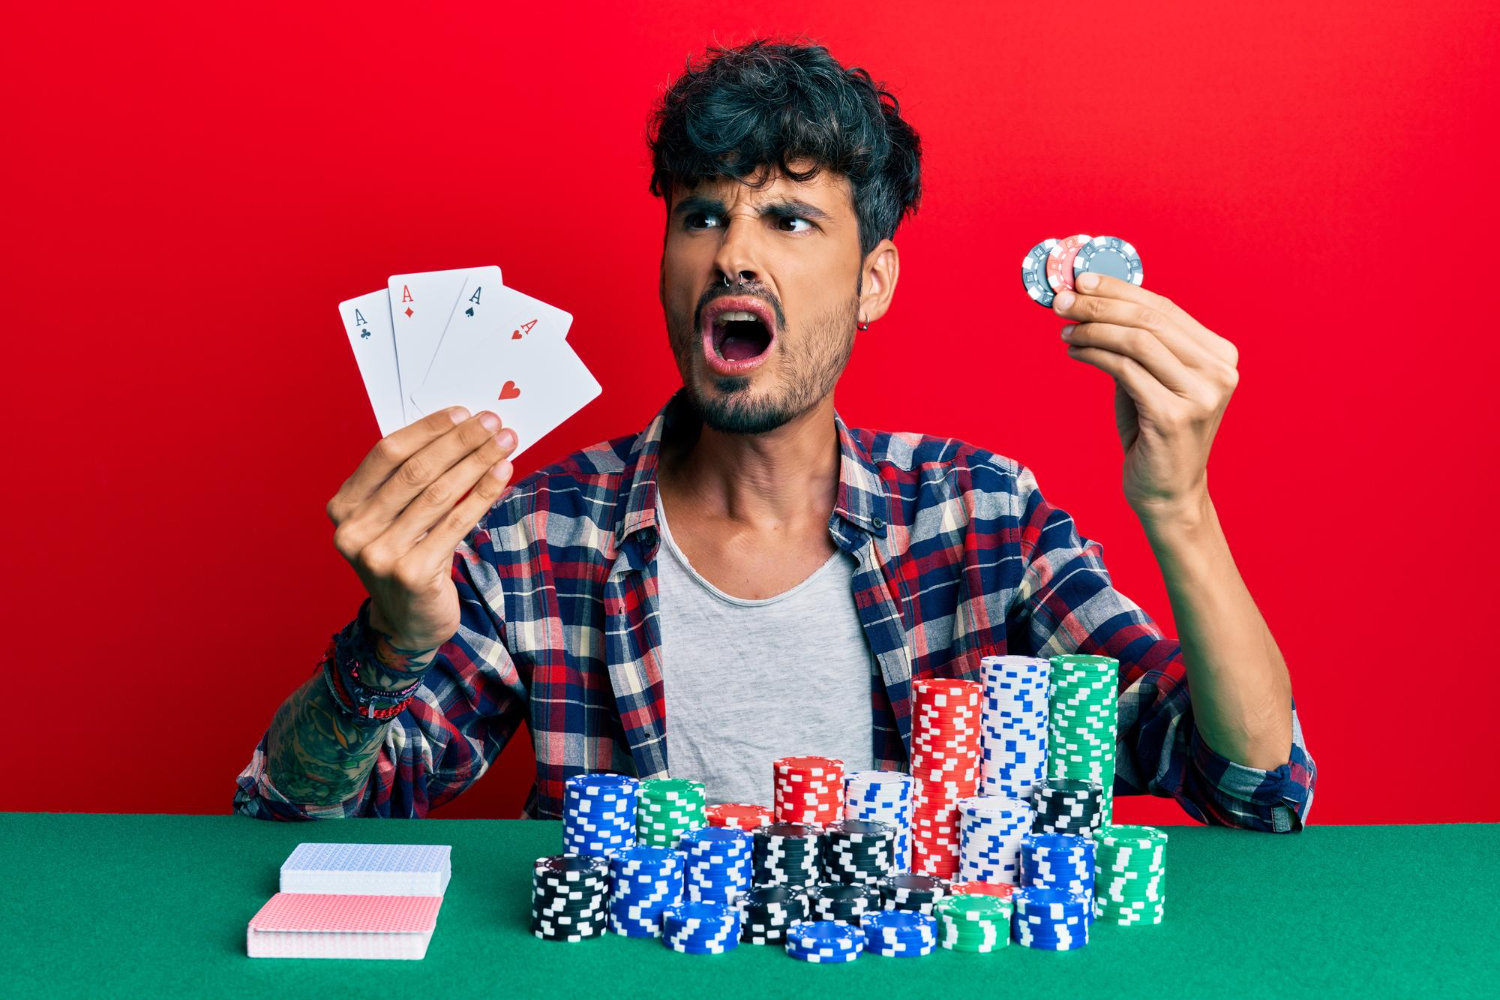 young-hispanic-man-playing-poker-holding-cards-casino-chips-angry-mad-screaming-frustrated-furious-shouting-with-anger-rage-aggressive-concept